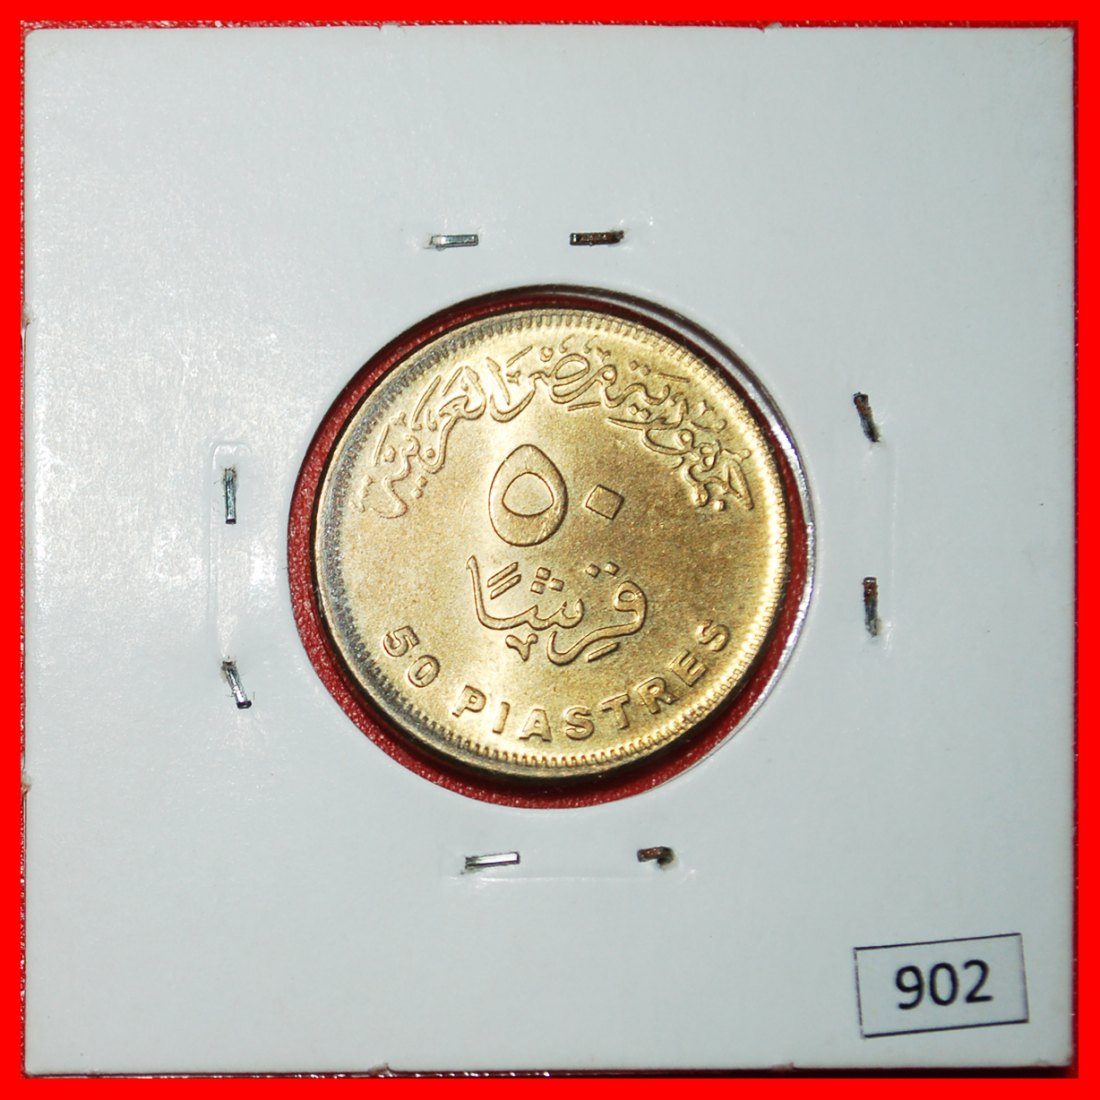  * CAPITAL ON SEA: EGYPT ★ 50 PIASTRES 1440-2019 UNC MINT LUSTRE! IN HOLDER!★LOW START ★ NO RESERVE!   